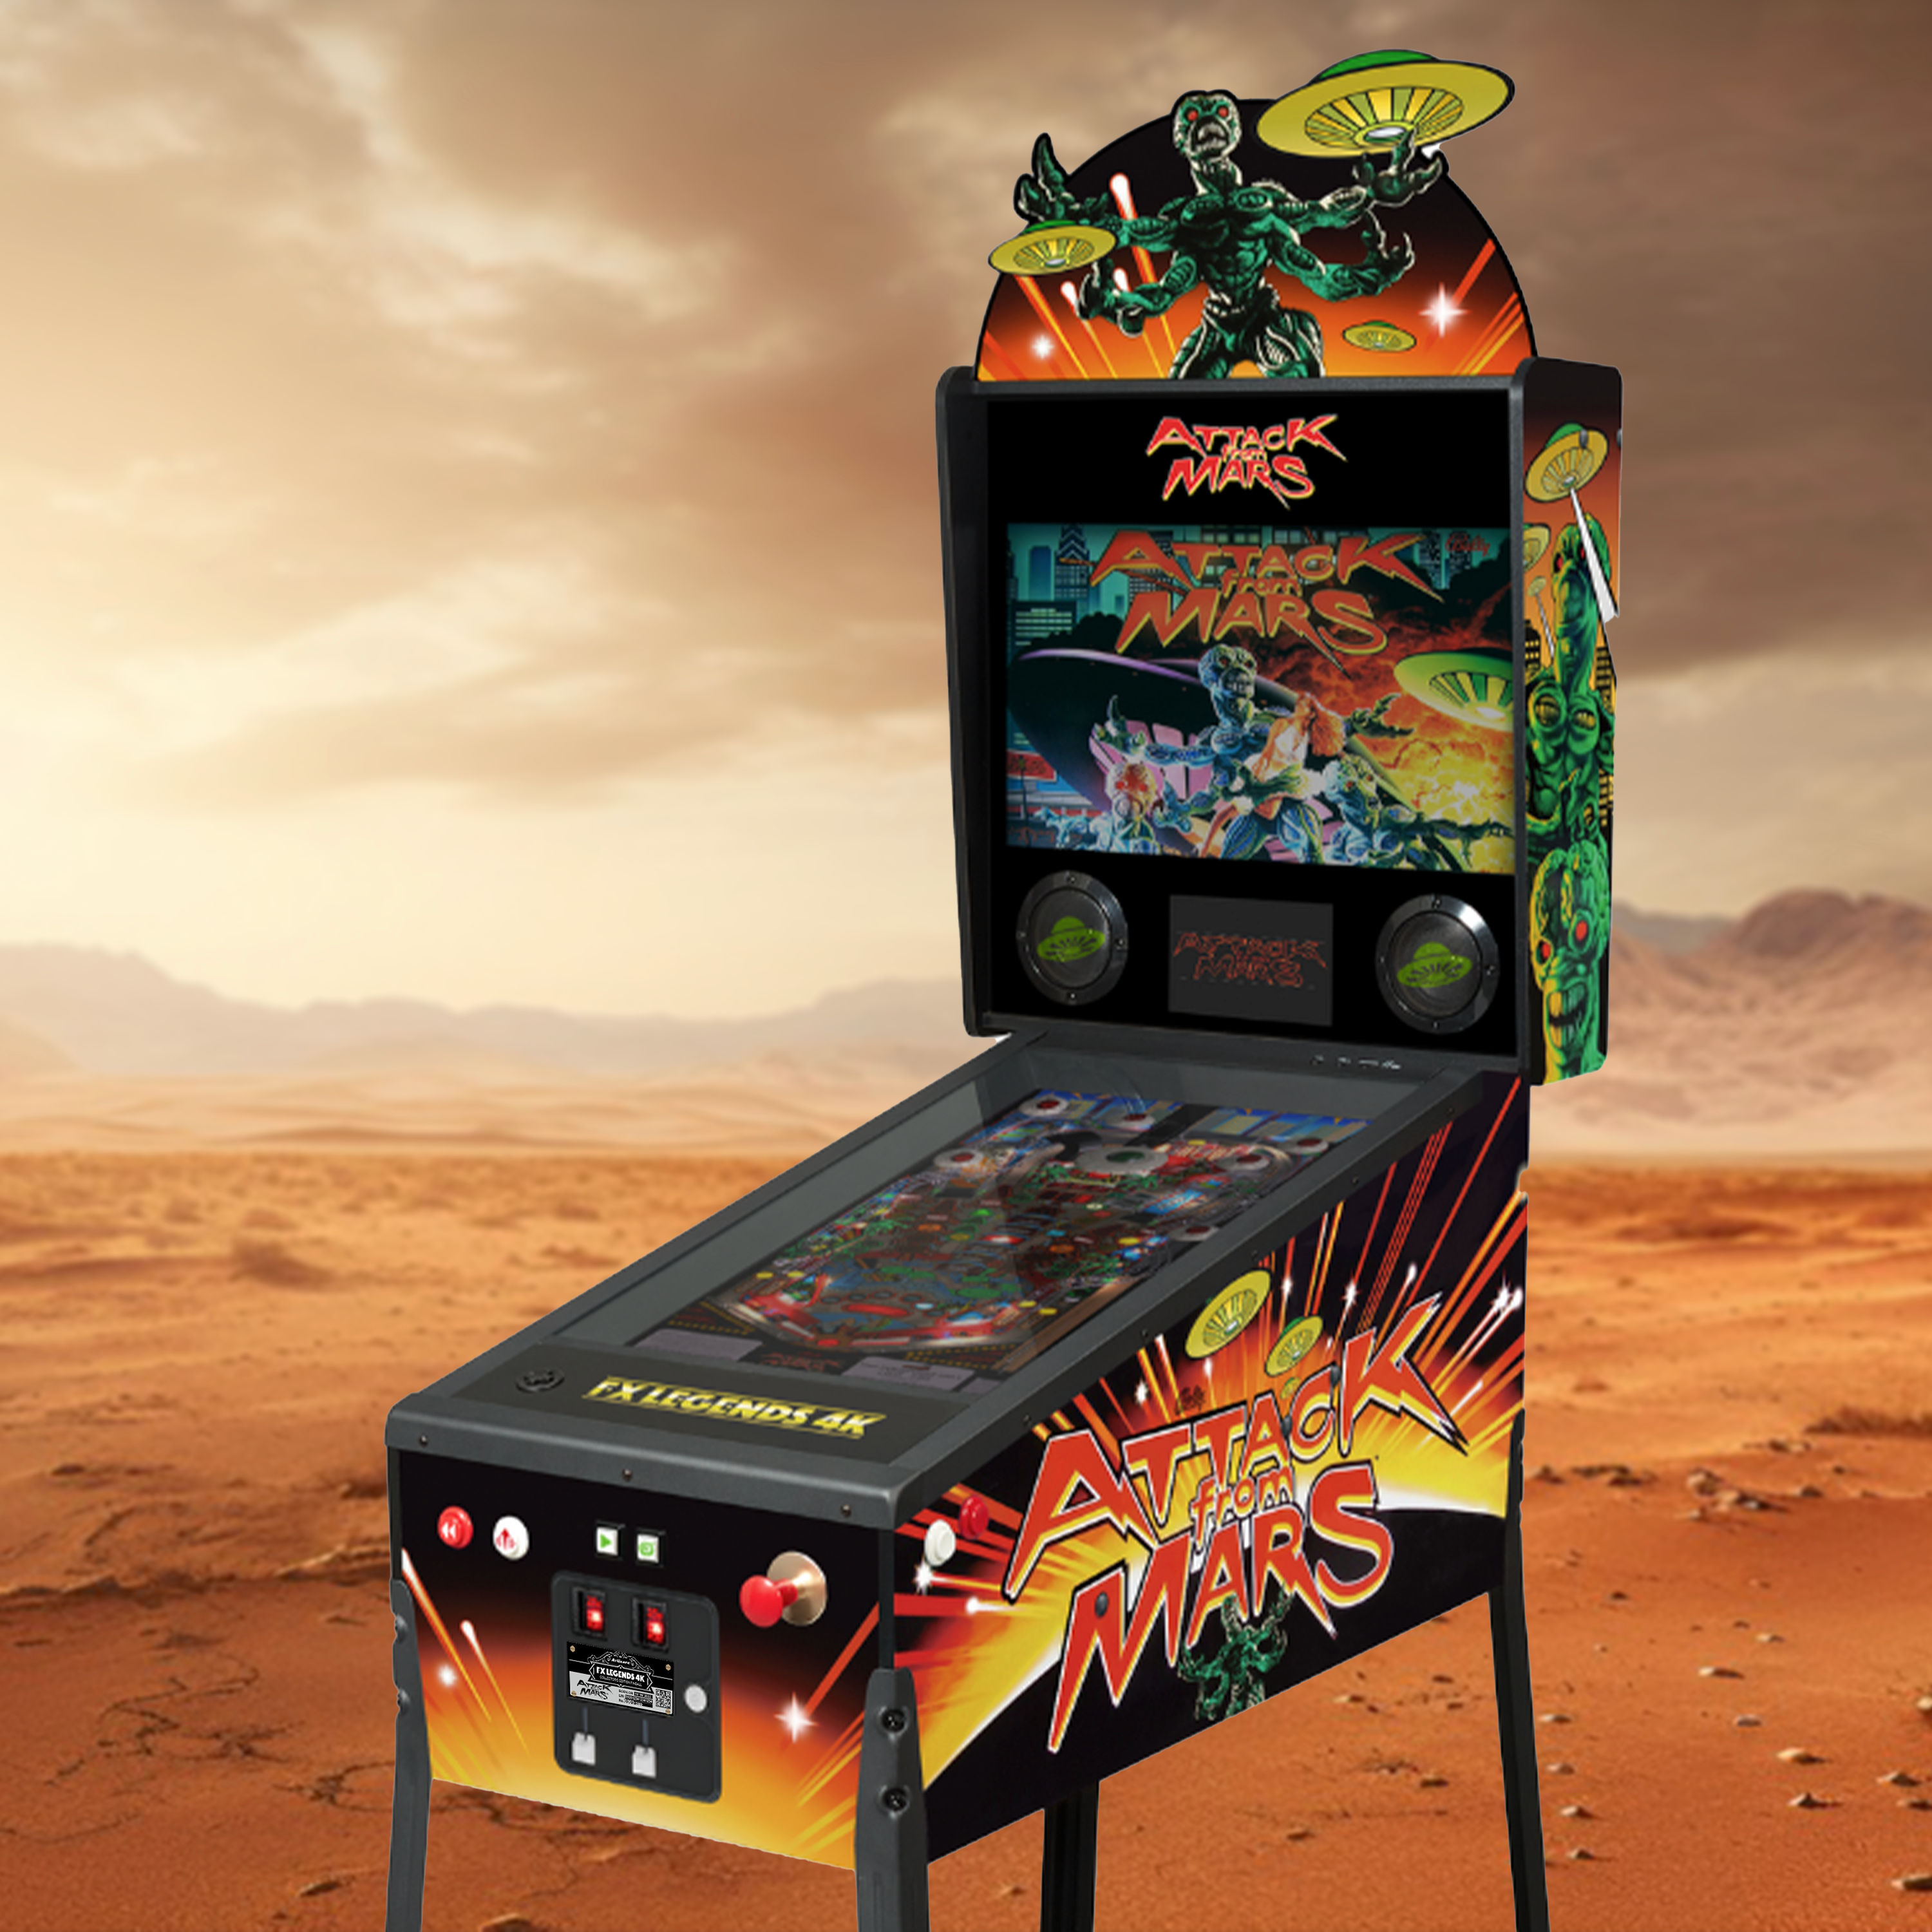 Attack From Mars Digital Pinball By Arcade1Up Review